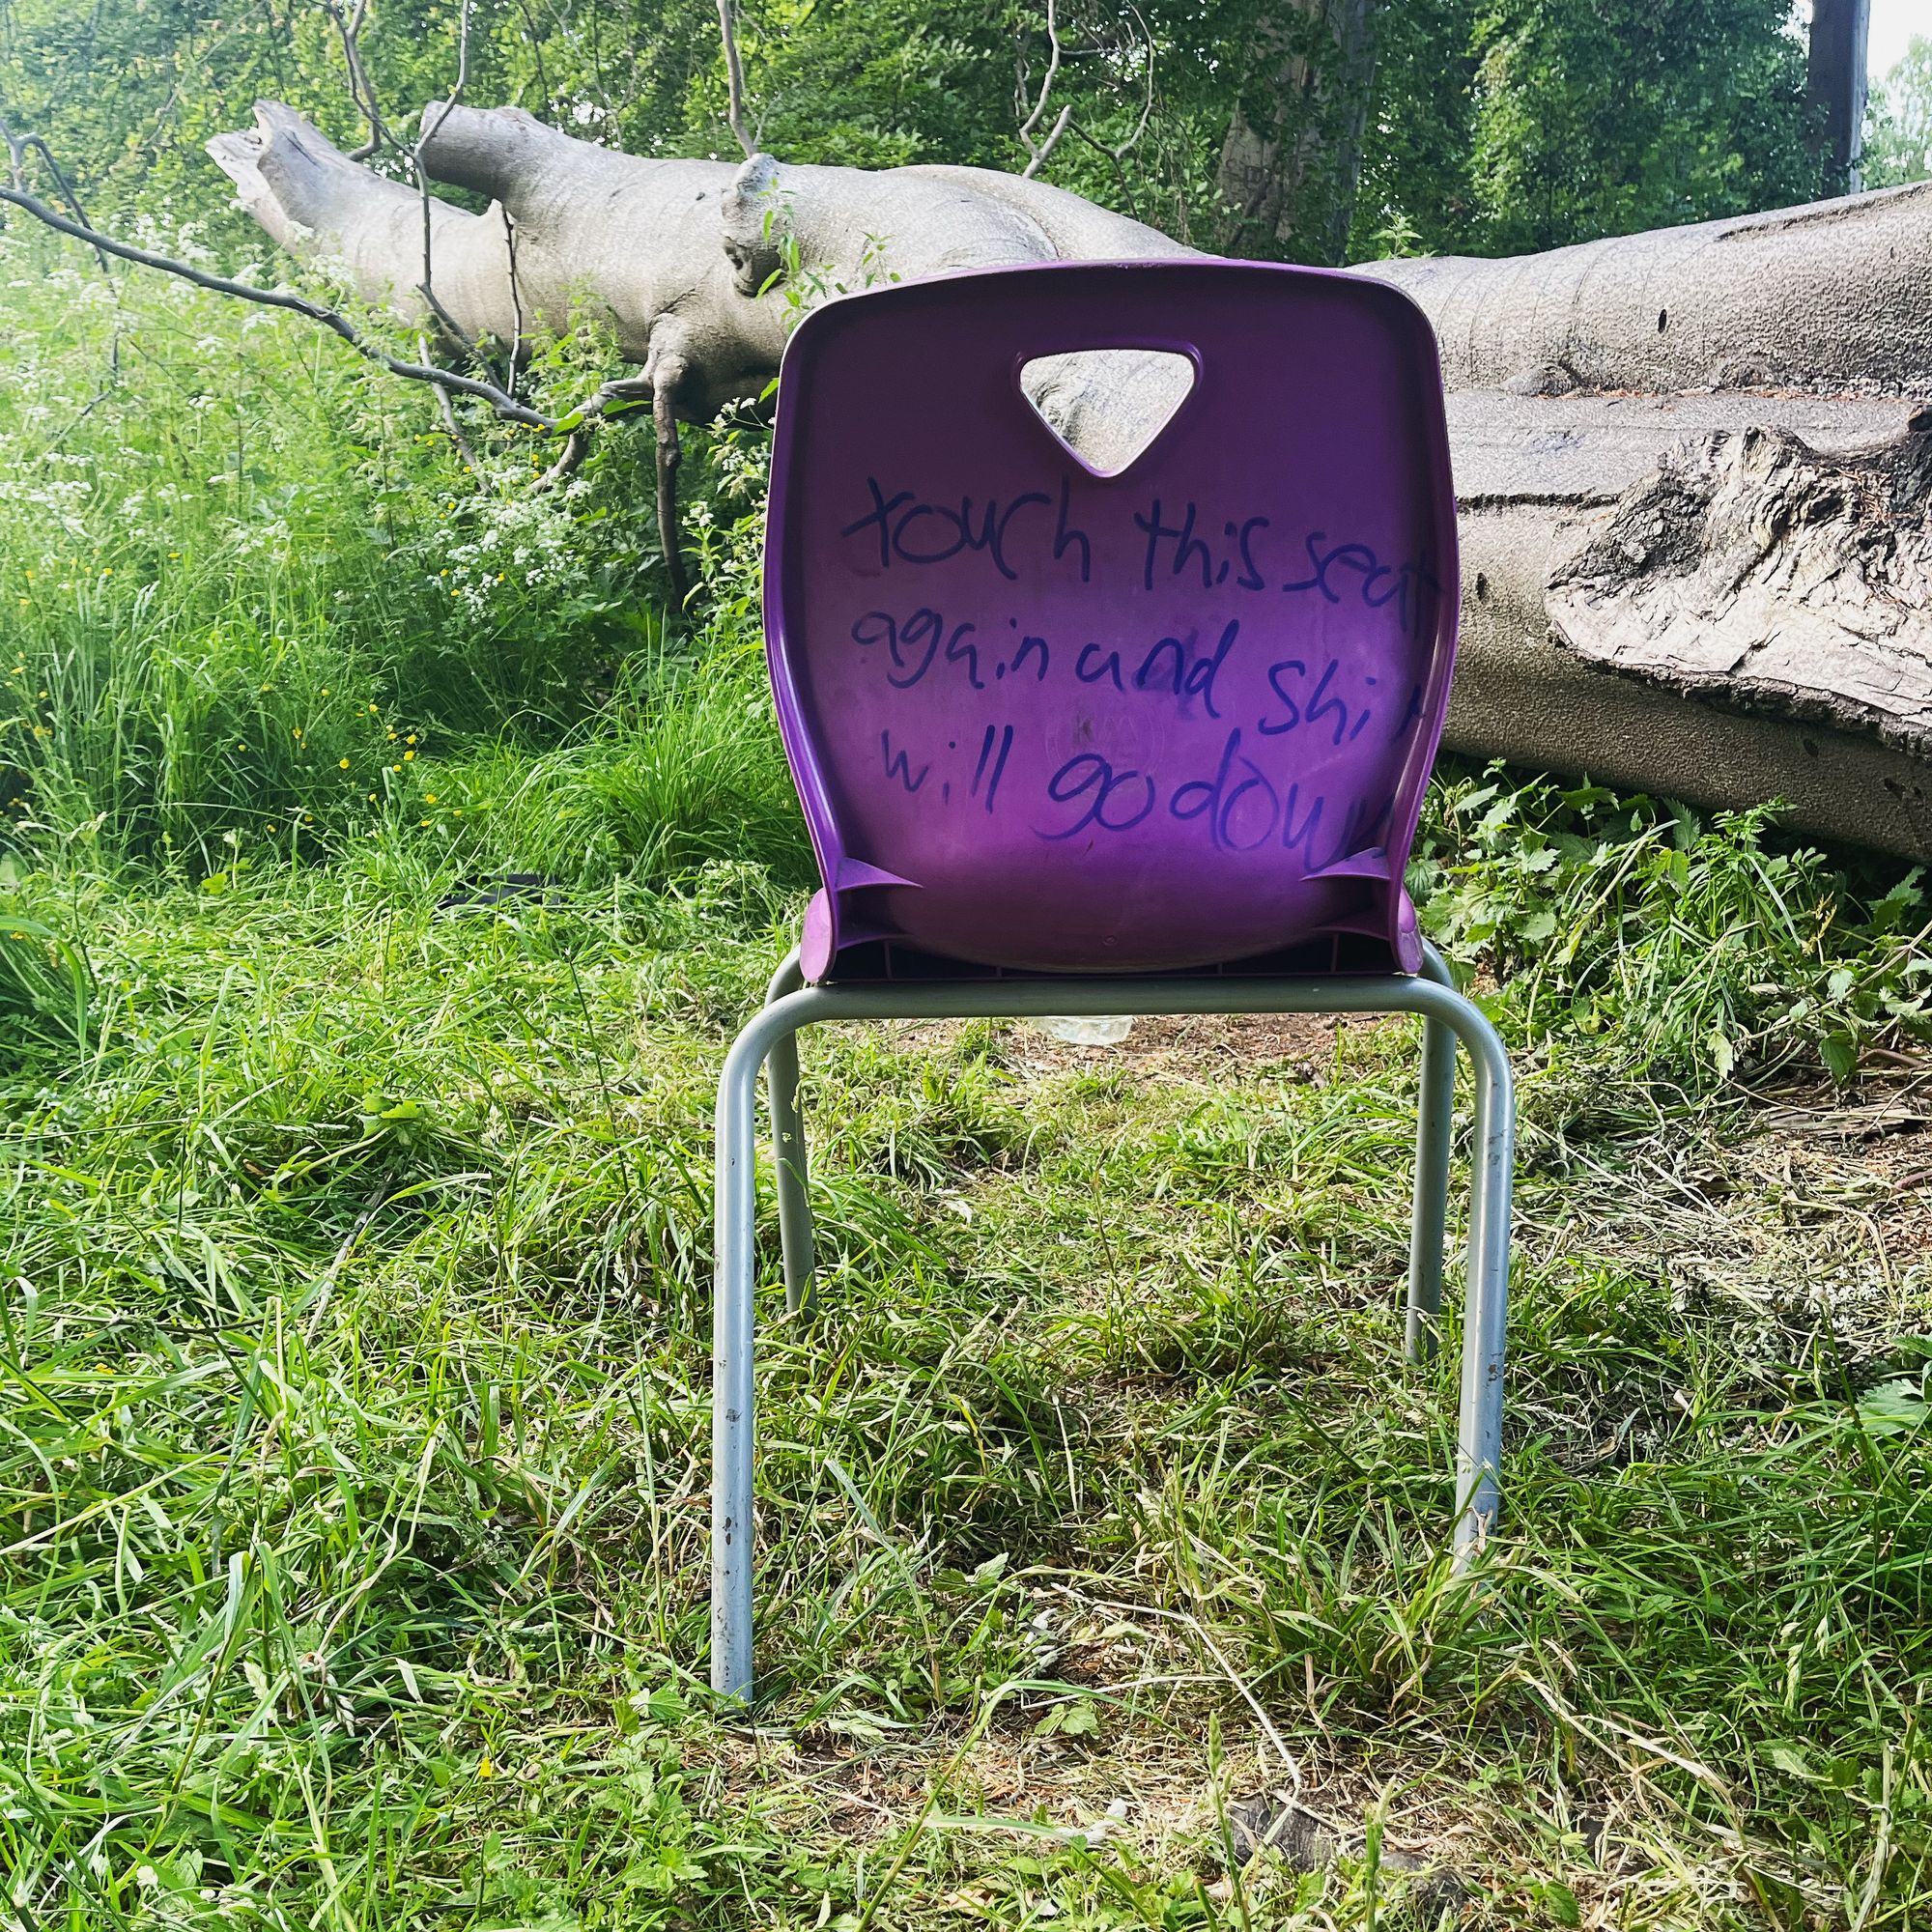 In the foreground, a purple plastic chair with metal legs sits empty on the grass in a wood, facing a gigantic fallen beech tree. On the back of the chair, facing the camera, are written the words "Touch this seat again and shit will go down" in black marker. 